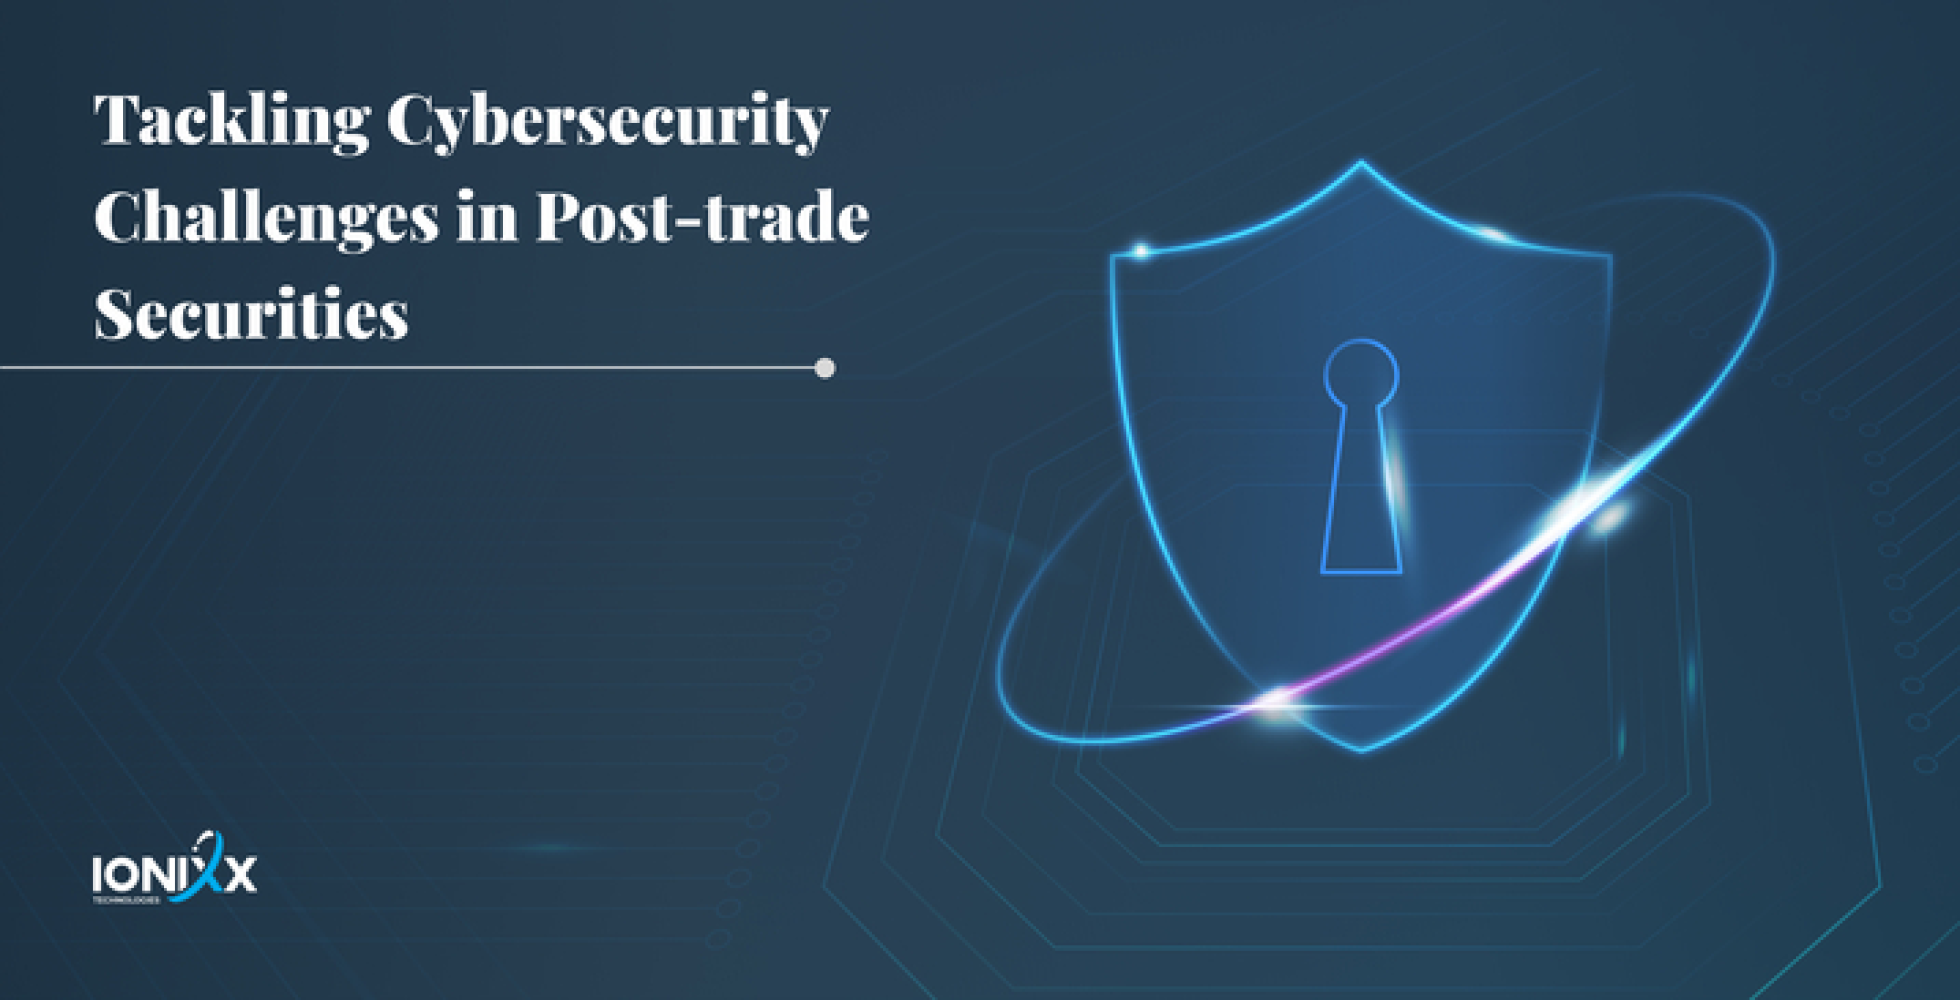 Tackling Cybersecurity Challenges in Post-trade Securities